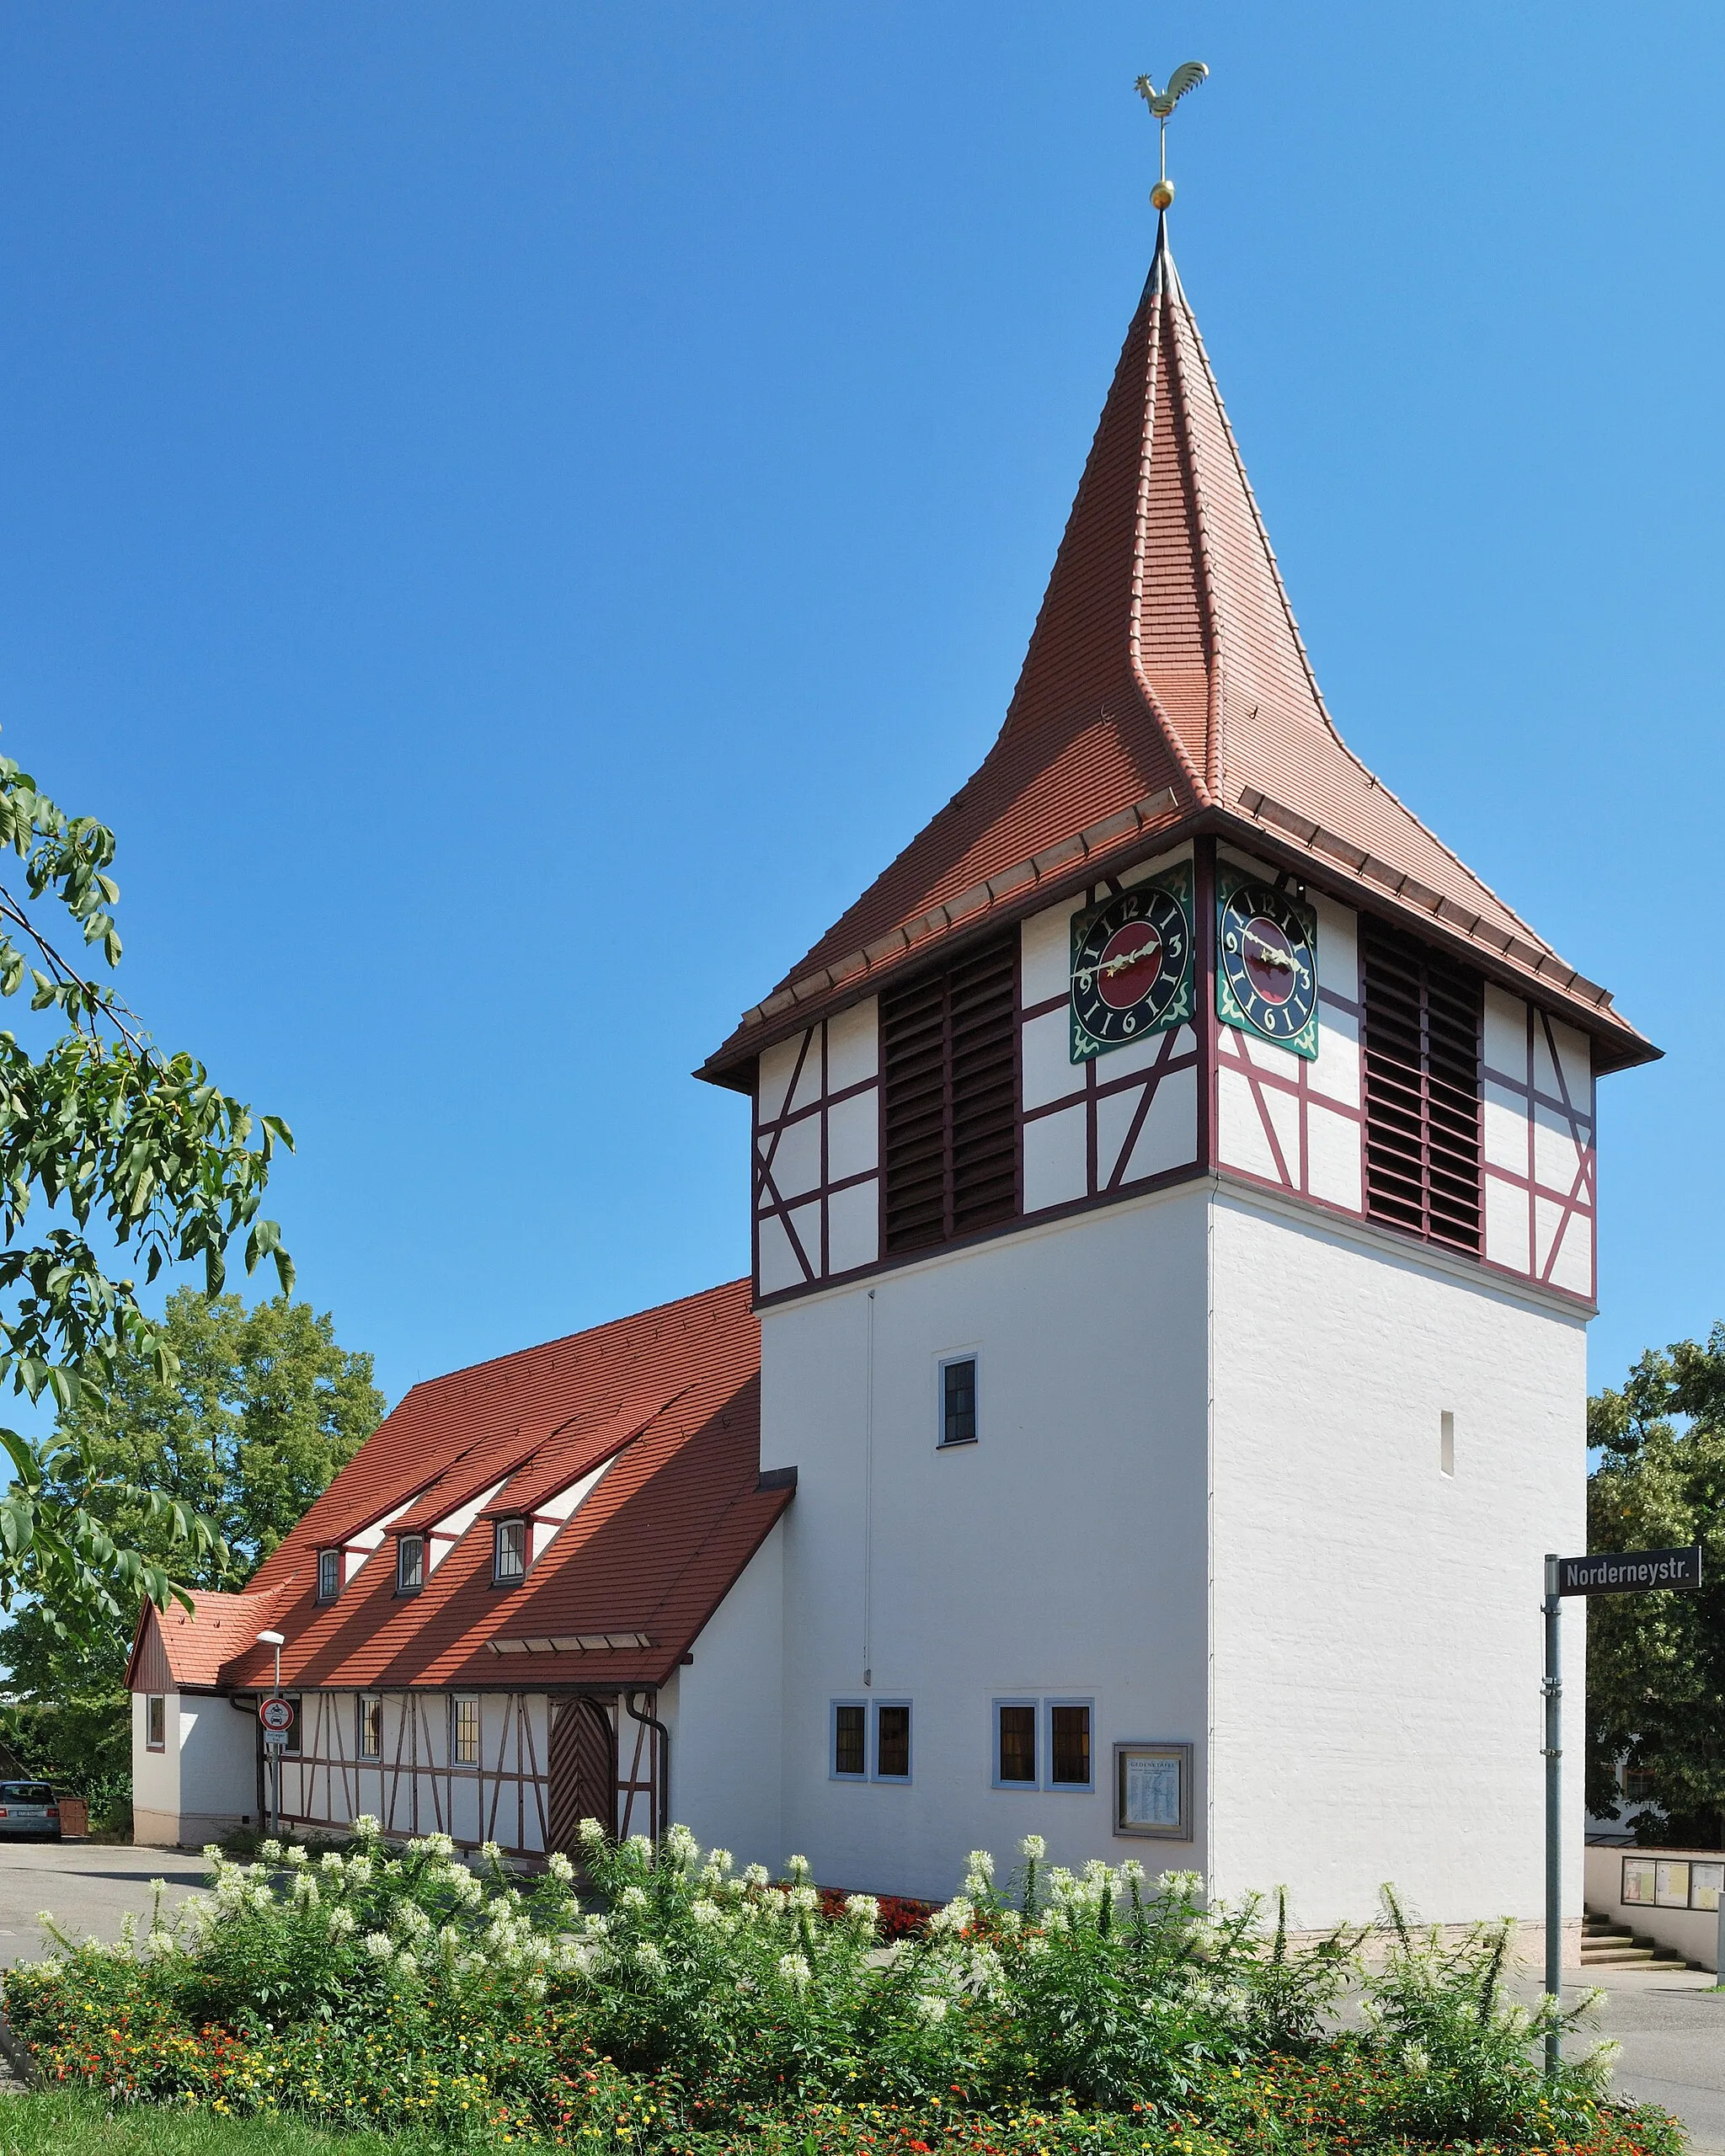 Photo showing: The protestant St. Michael church in Neuwirtshaus, a district of Stuttgart in Germany.